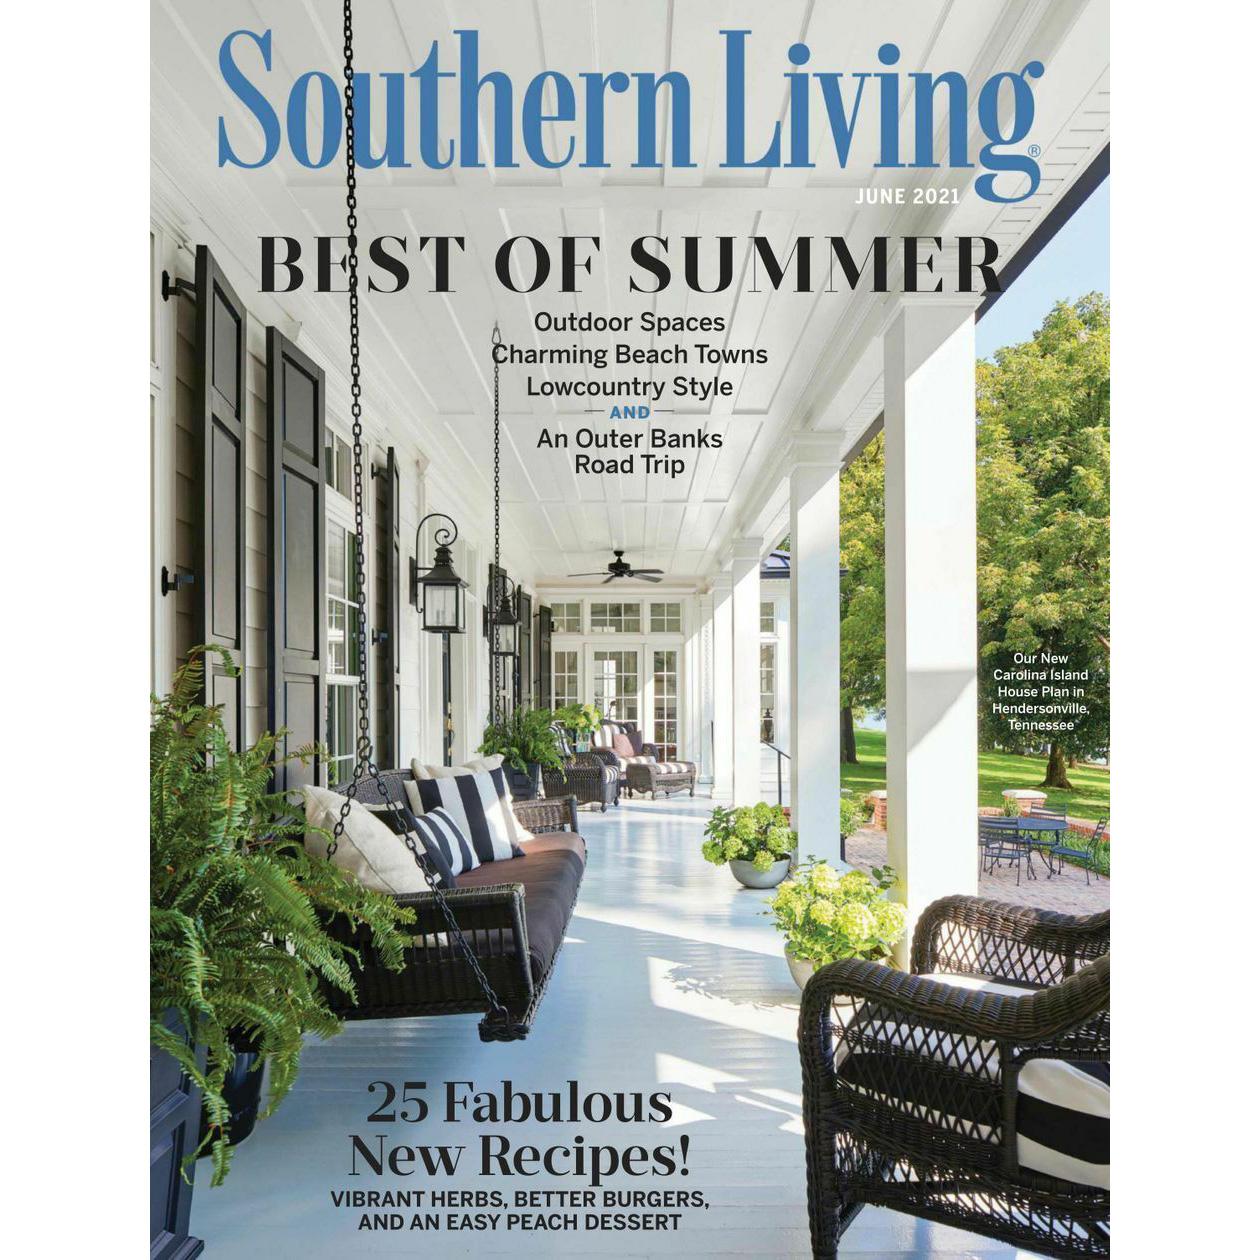 Southern Living Magazine Year Subscription for $5.50